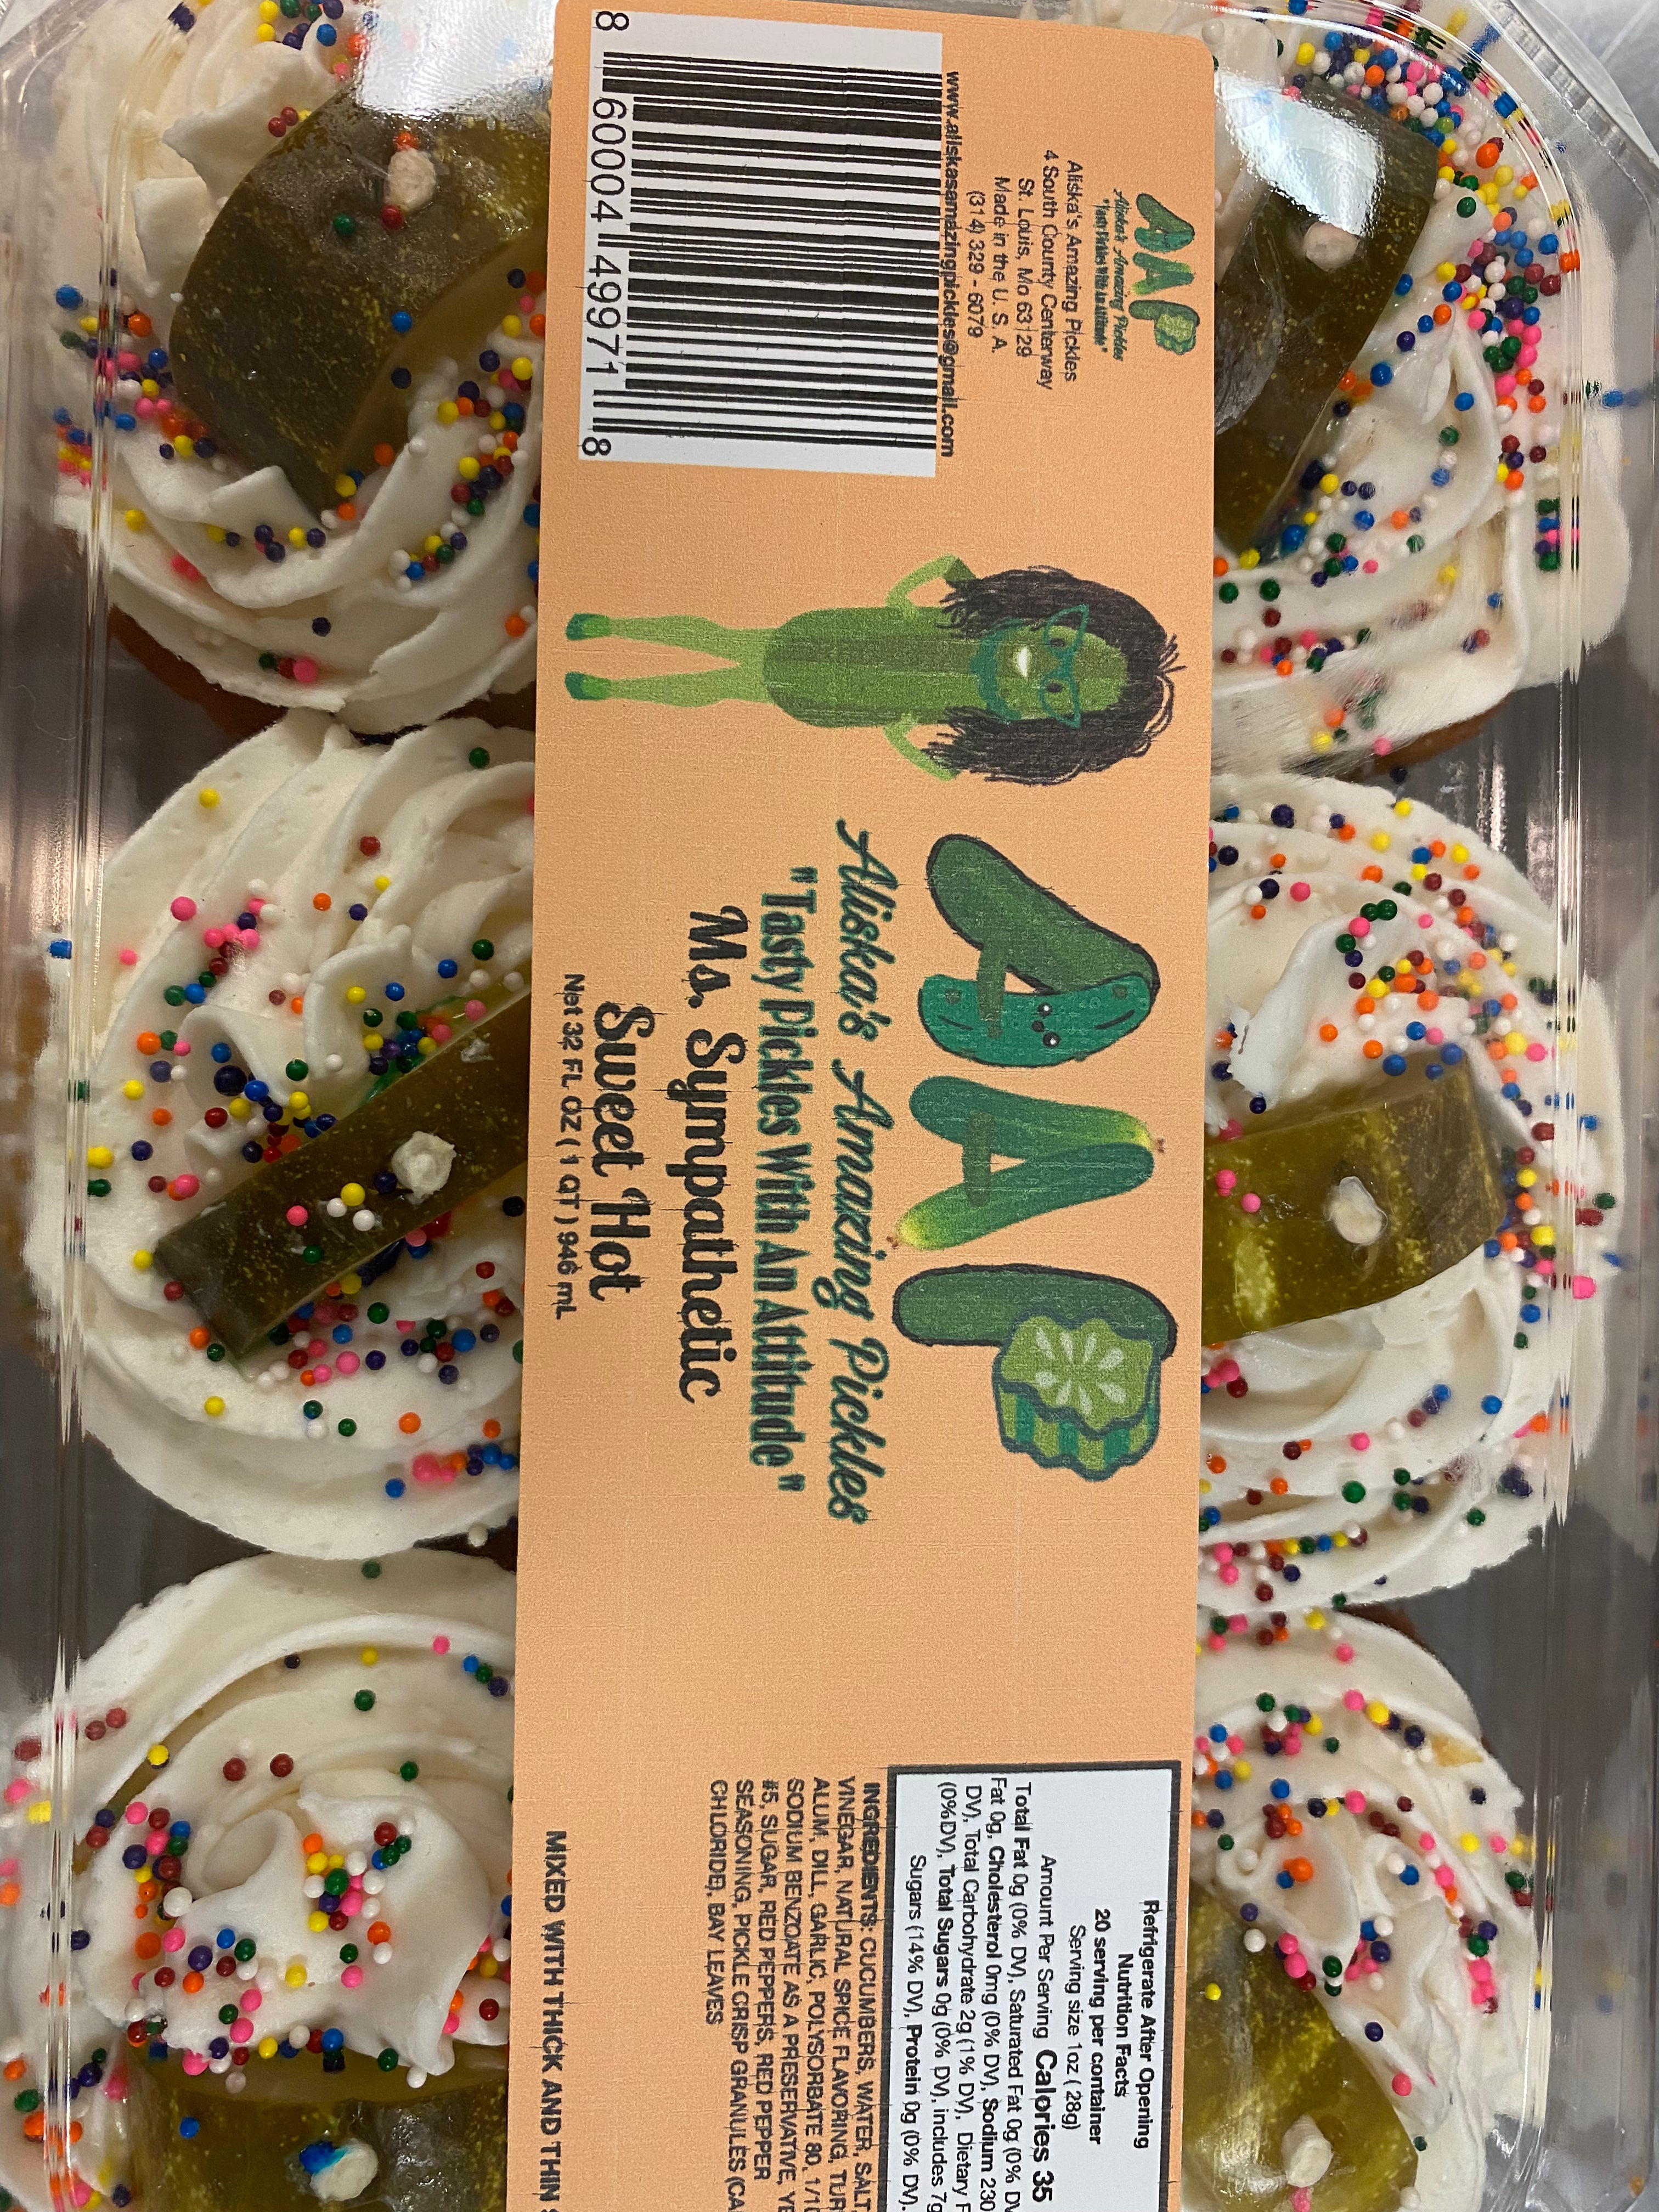 Pickle Flavored Cupcakes